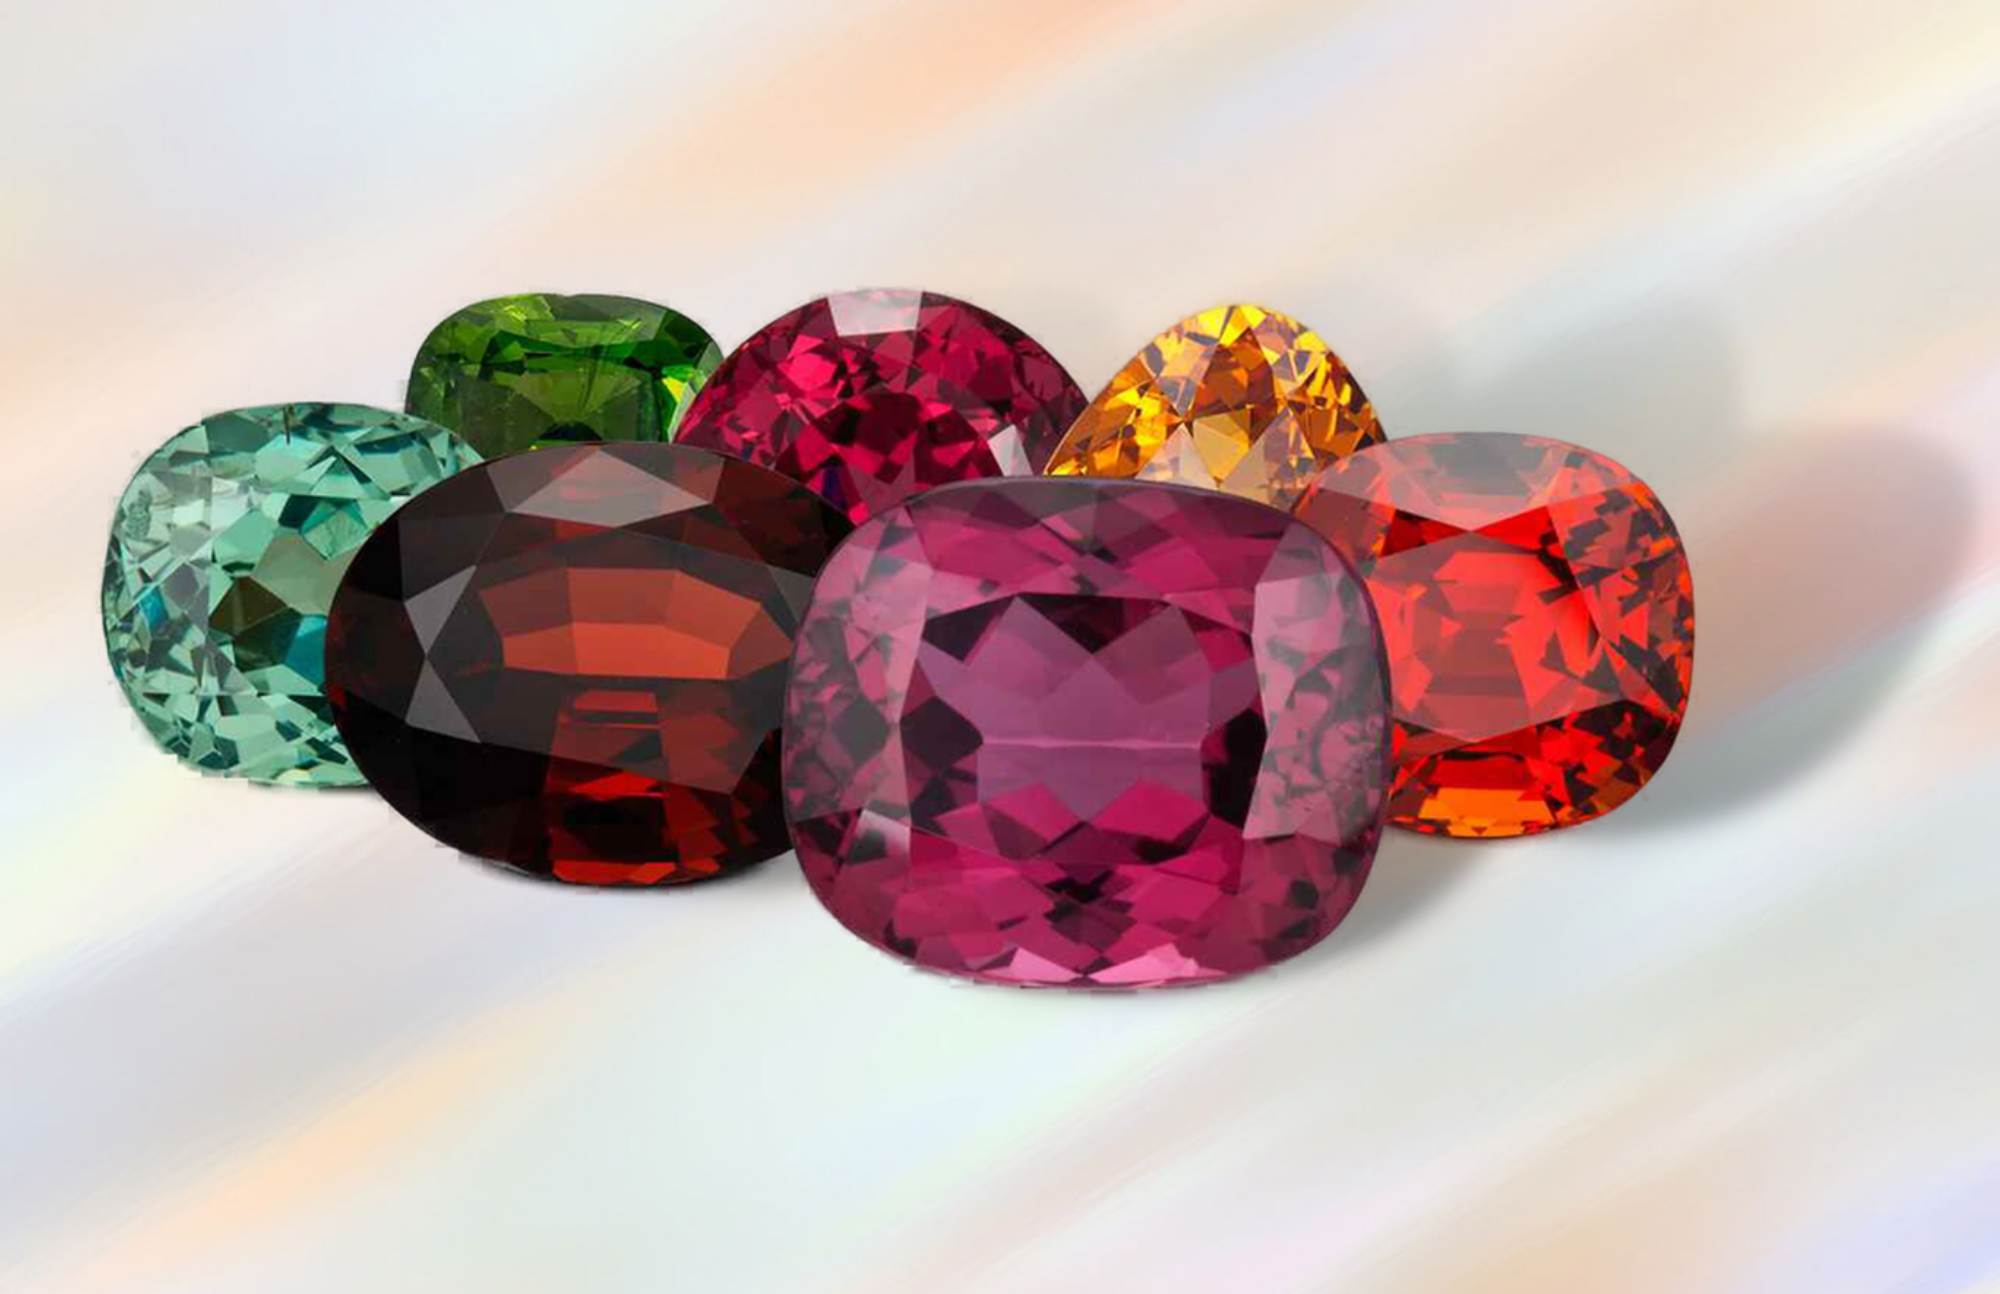 Different colors and shapes of garnet